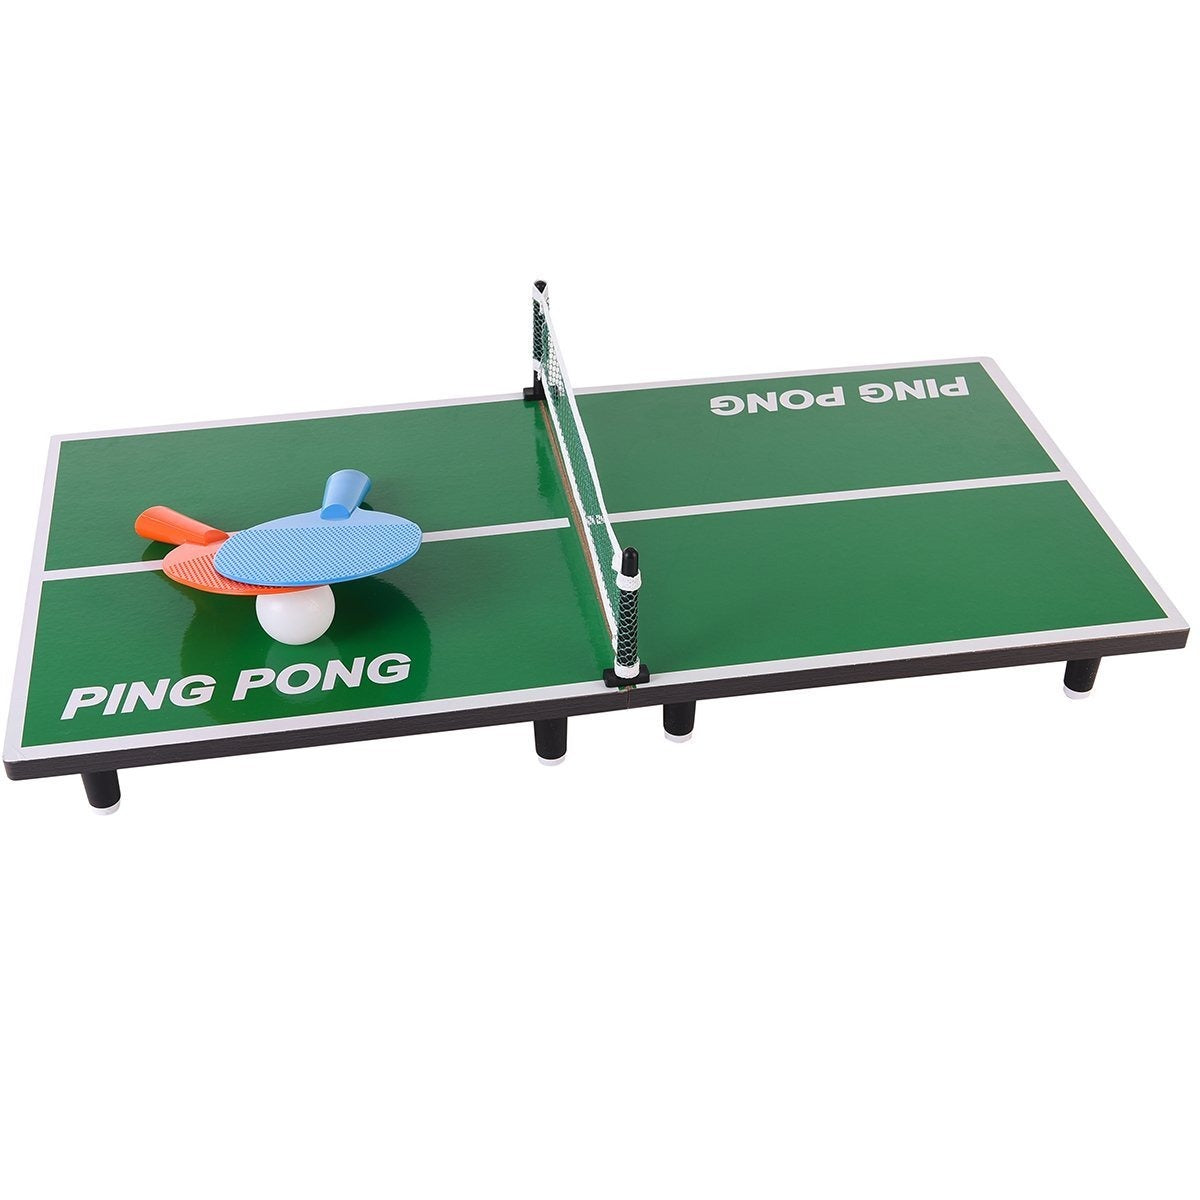 Desktop Ping Pong Game - Mad Man by Mad Style Wholesale